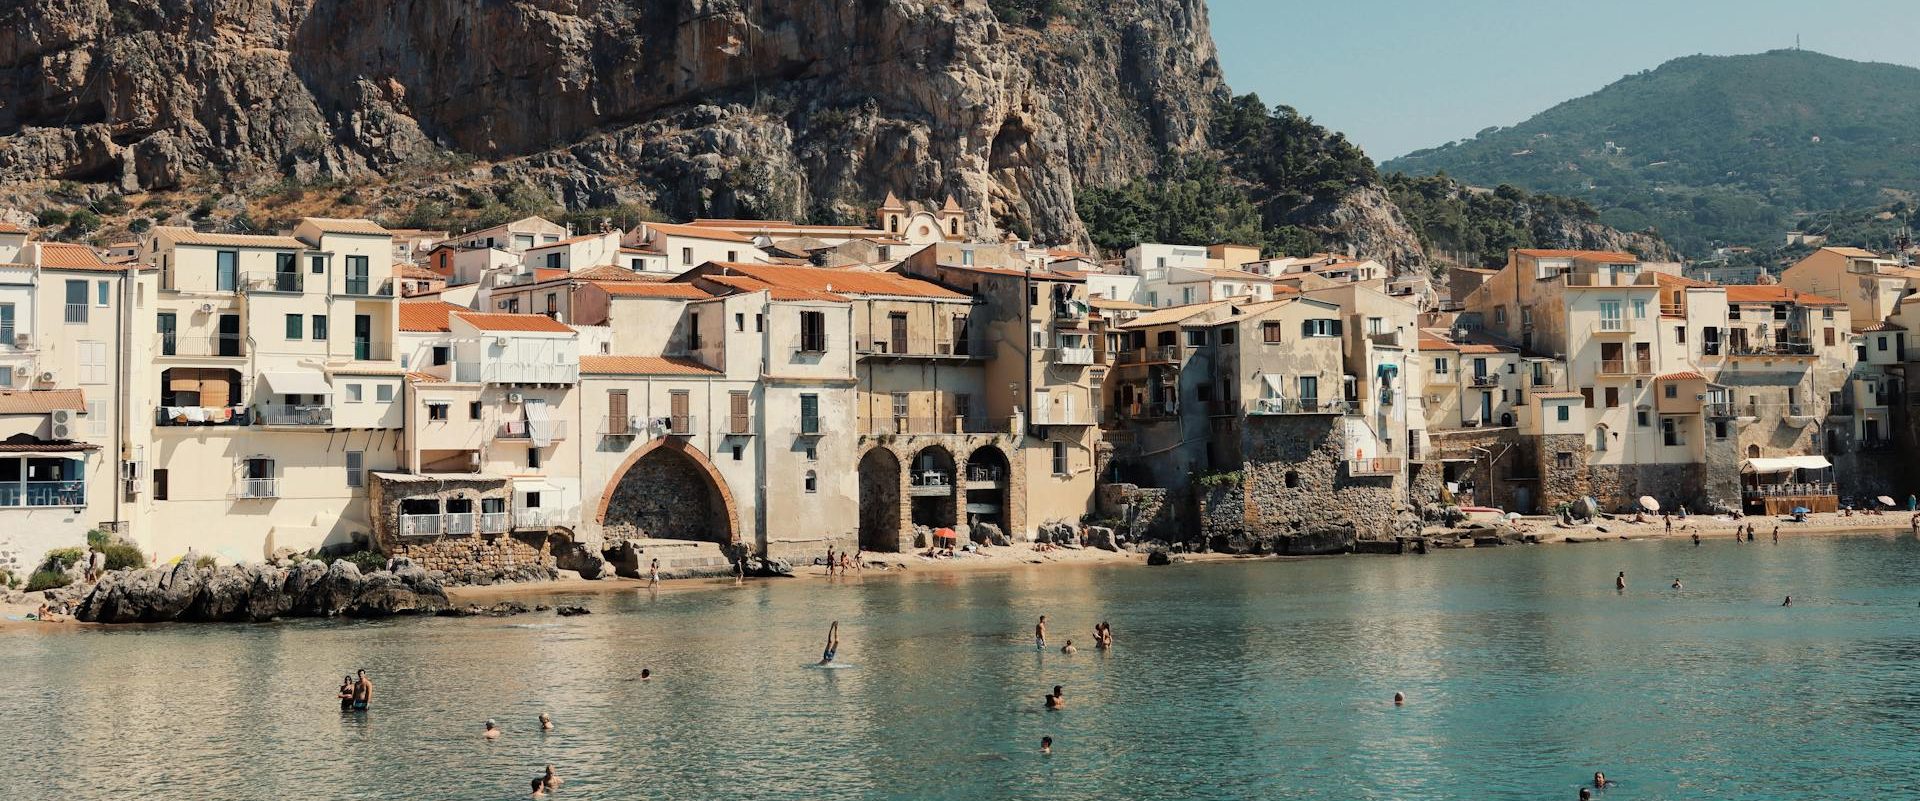 Relocation to Italy: 1 Euro Houses in Sicily